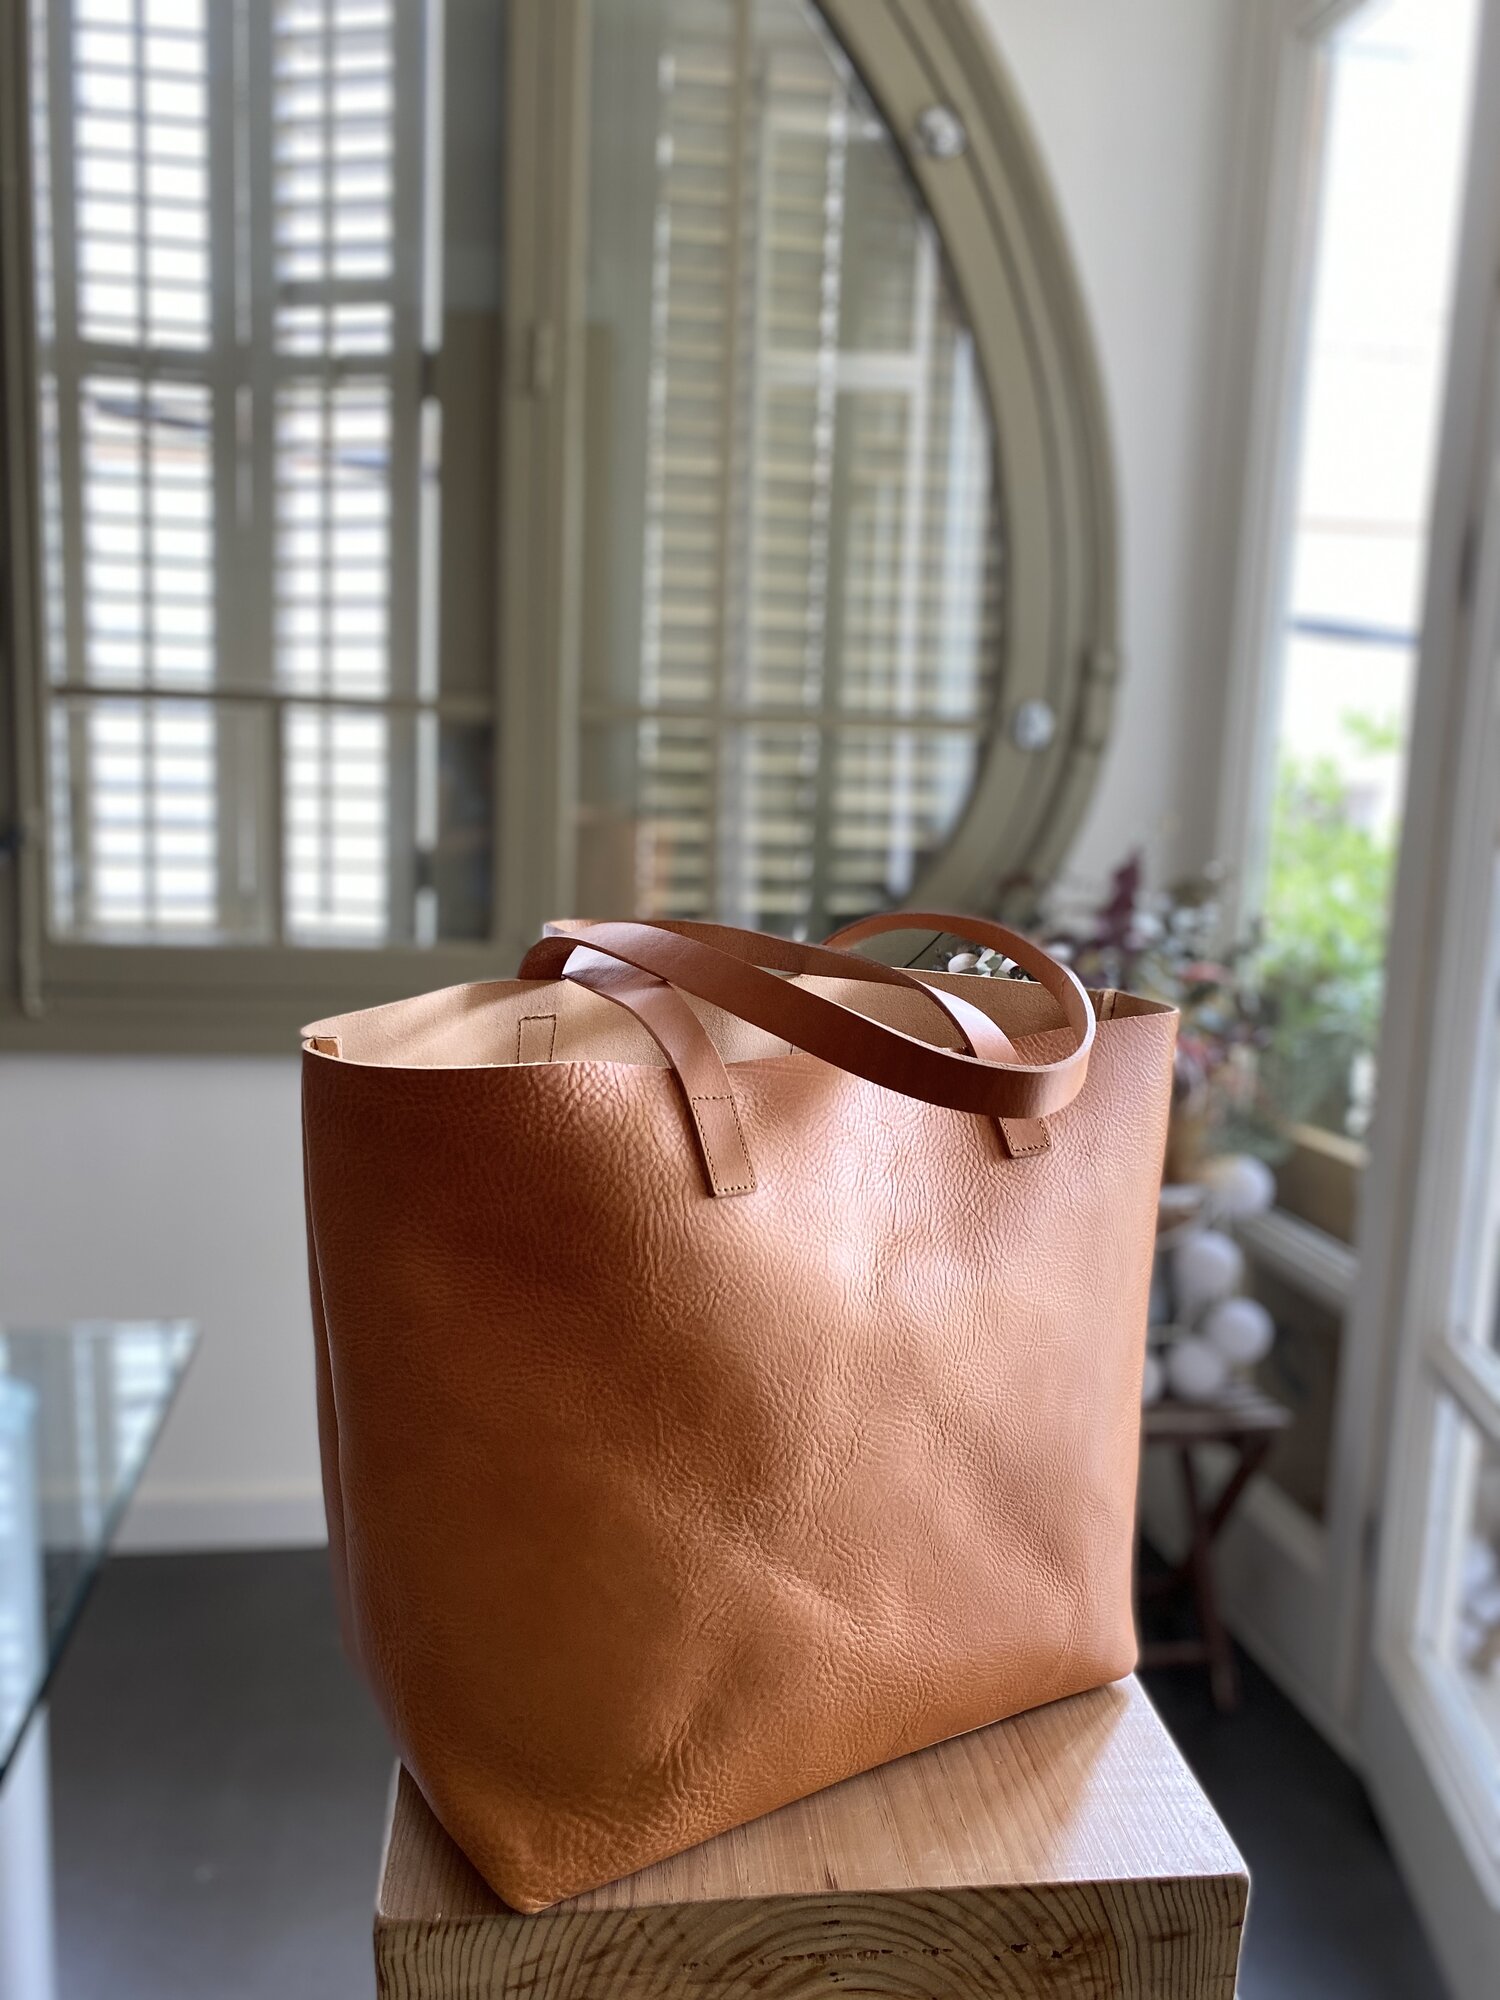 DAY TOTE LEATHER CAMEL